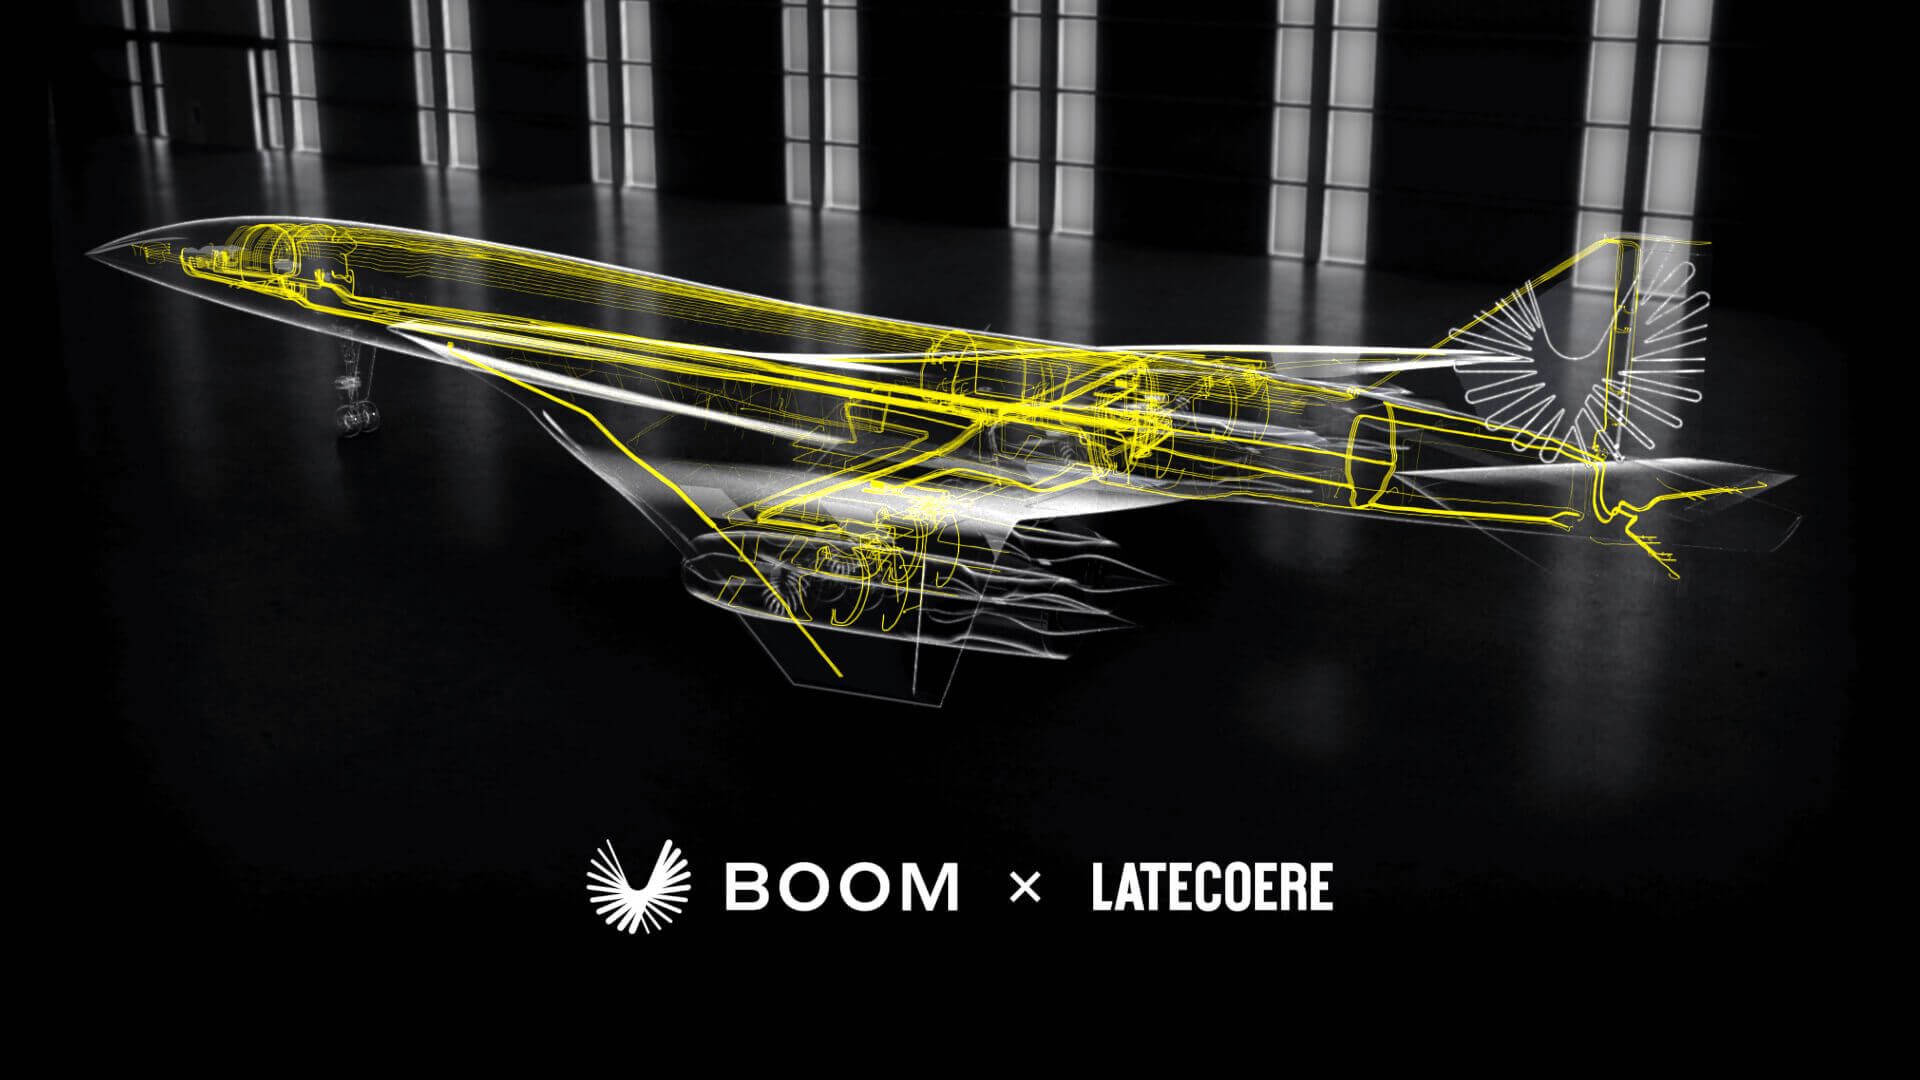 Latecoere_EWIS_Still_v4B - Boom Overture cutaway with wiring in yellow